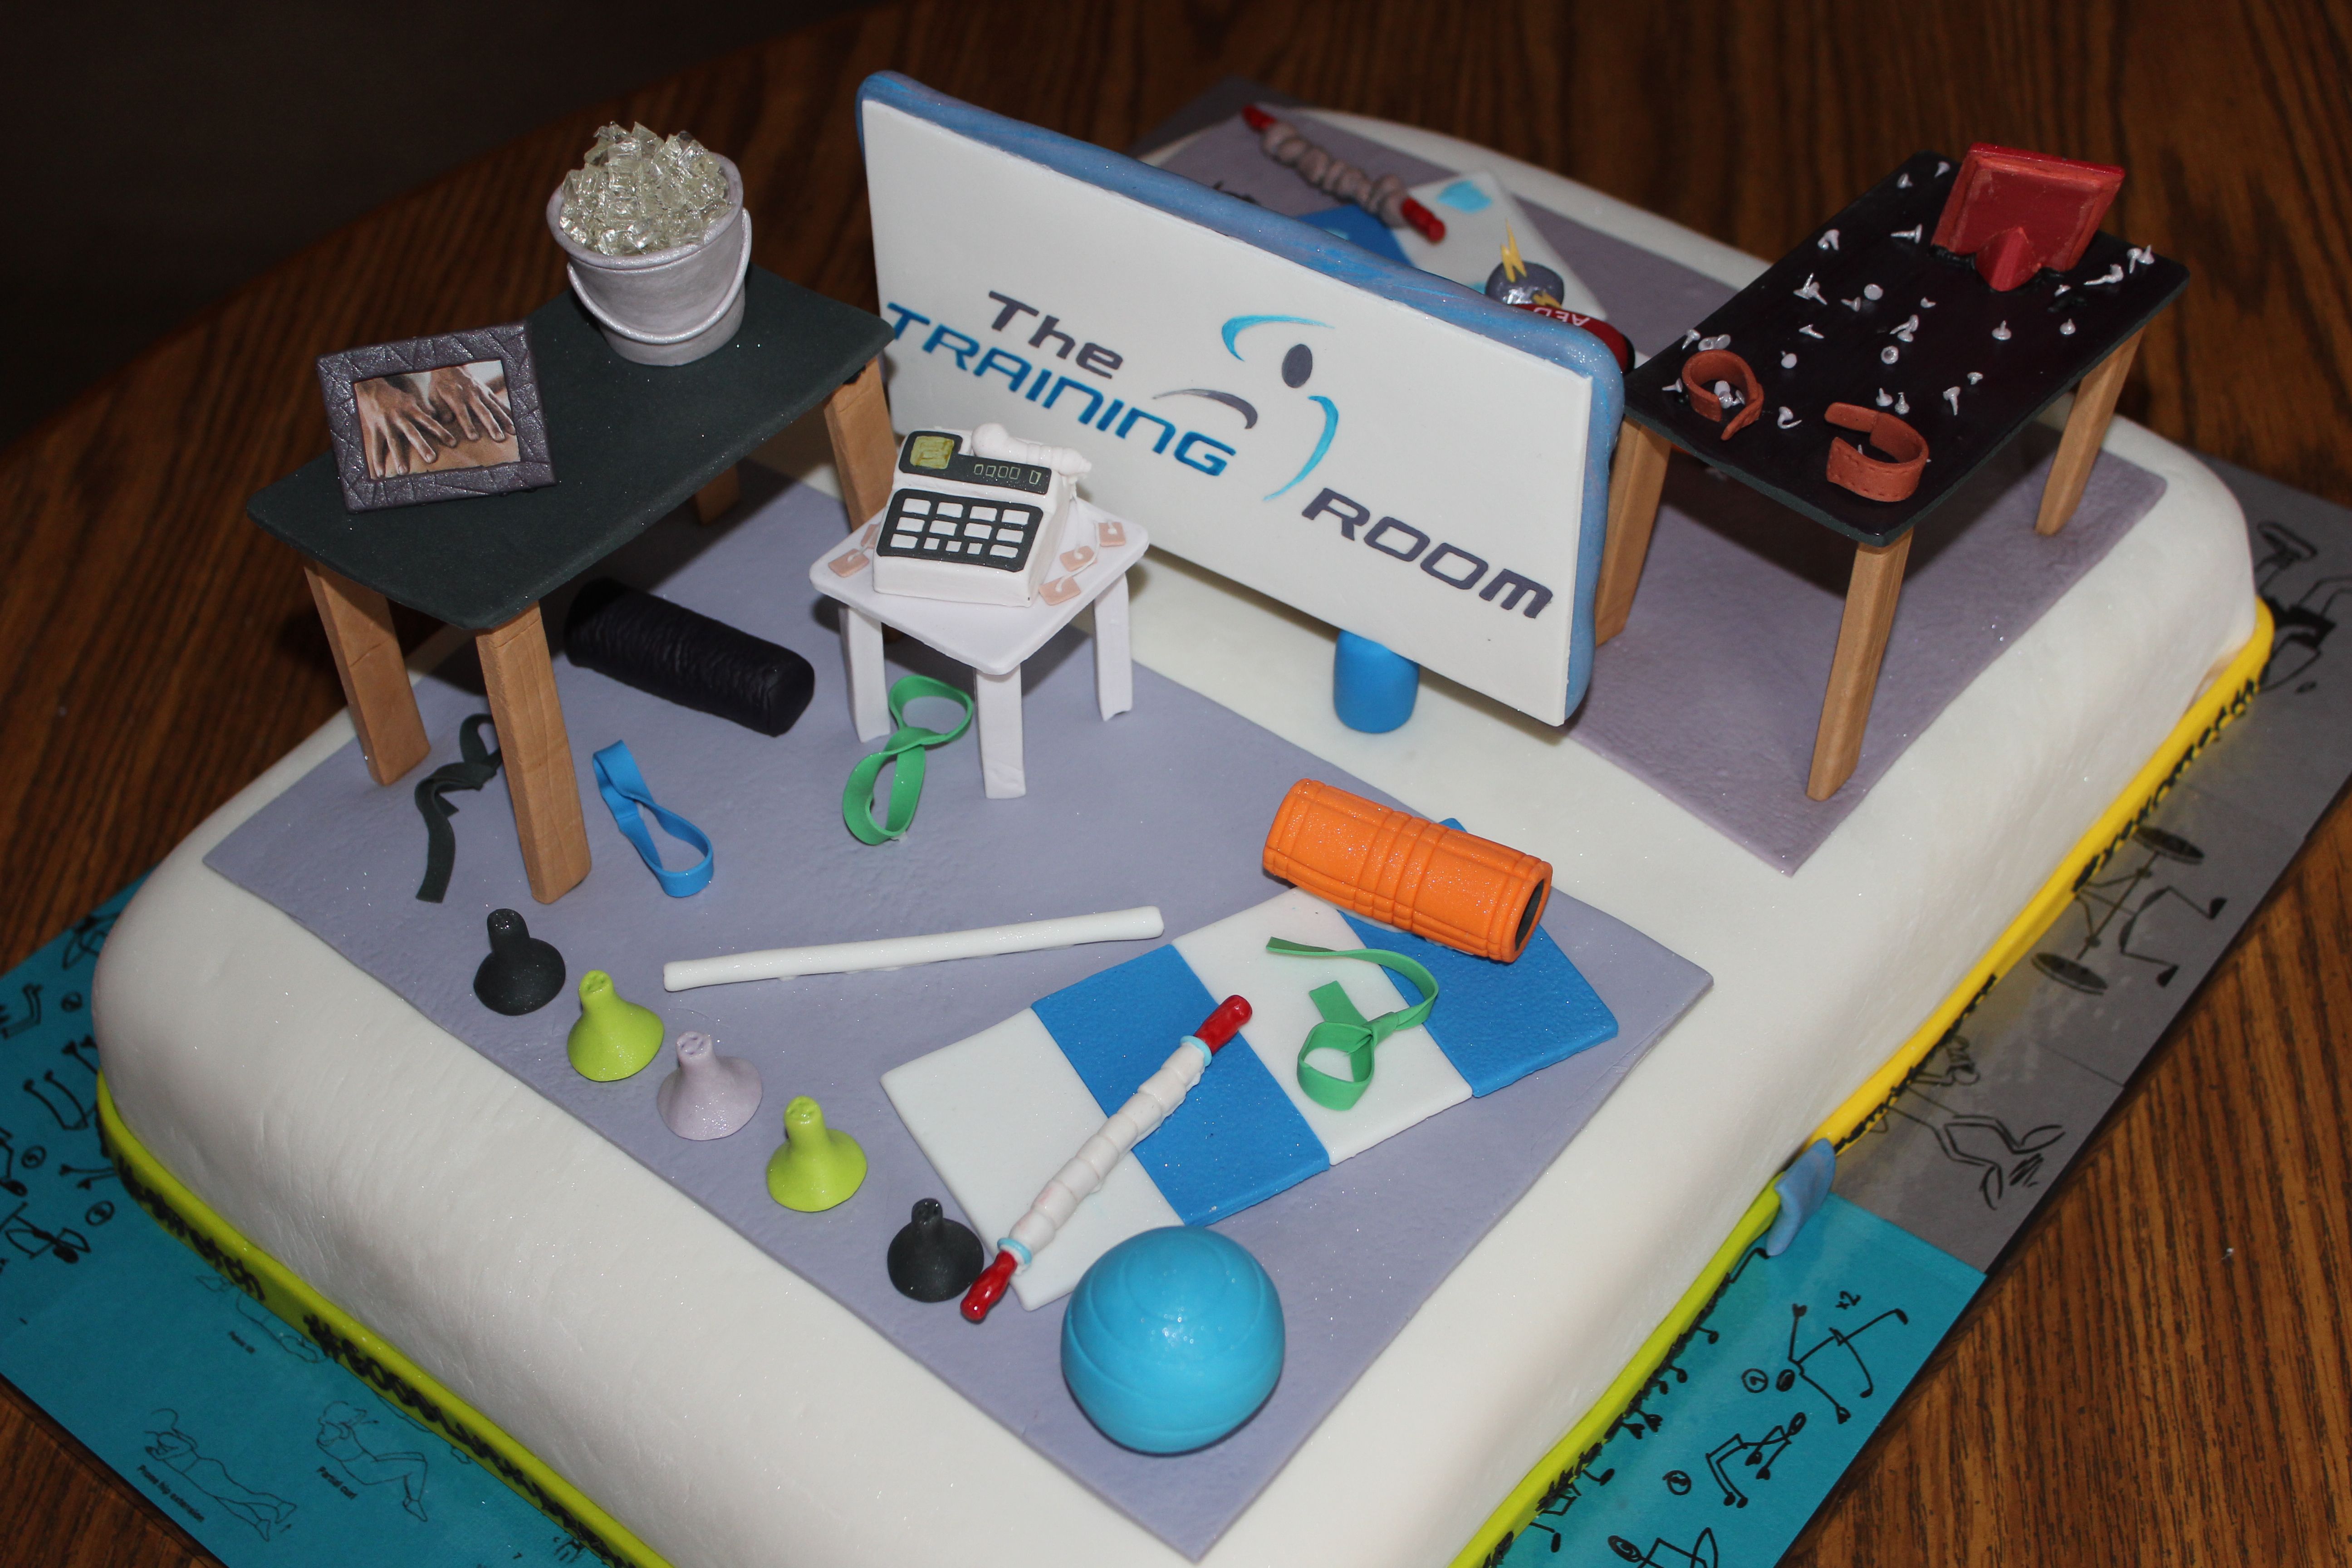 Physiotherapy Decorated Cake